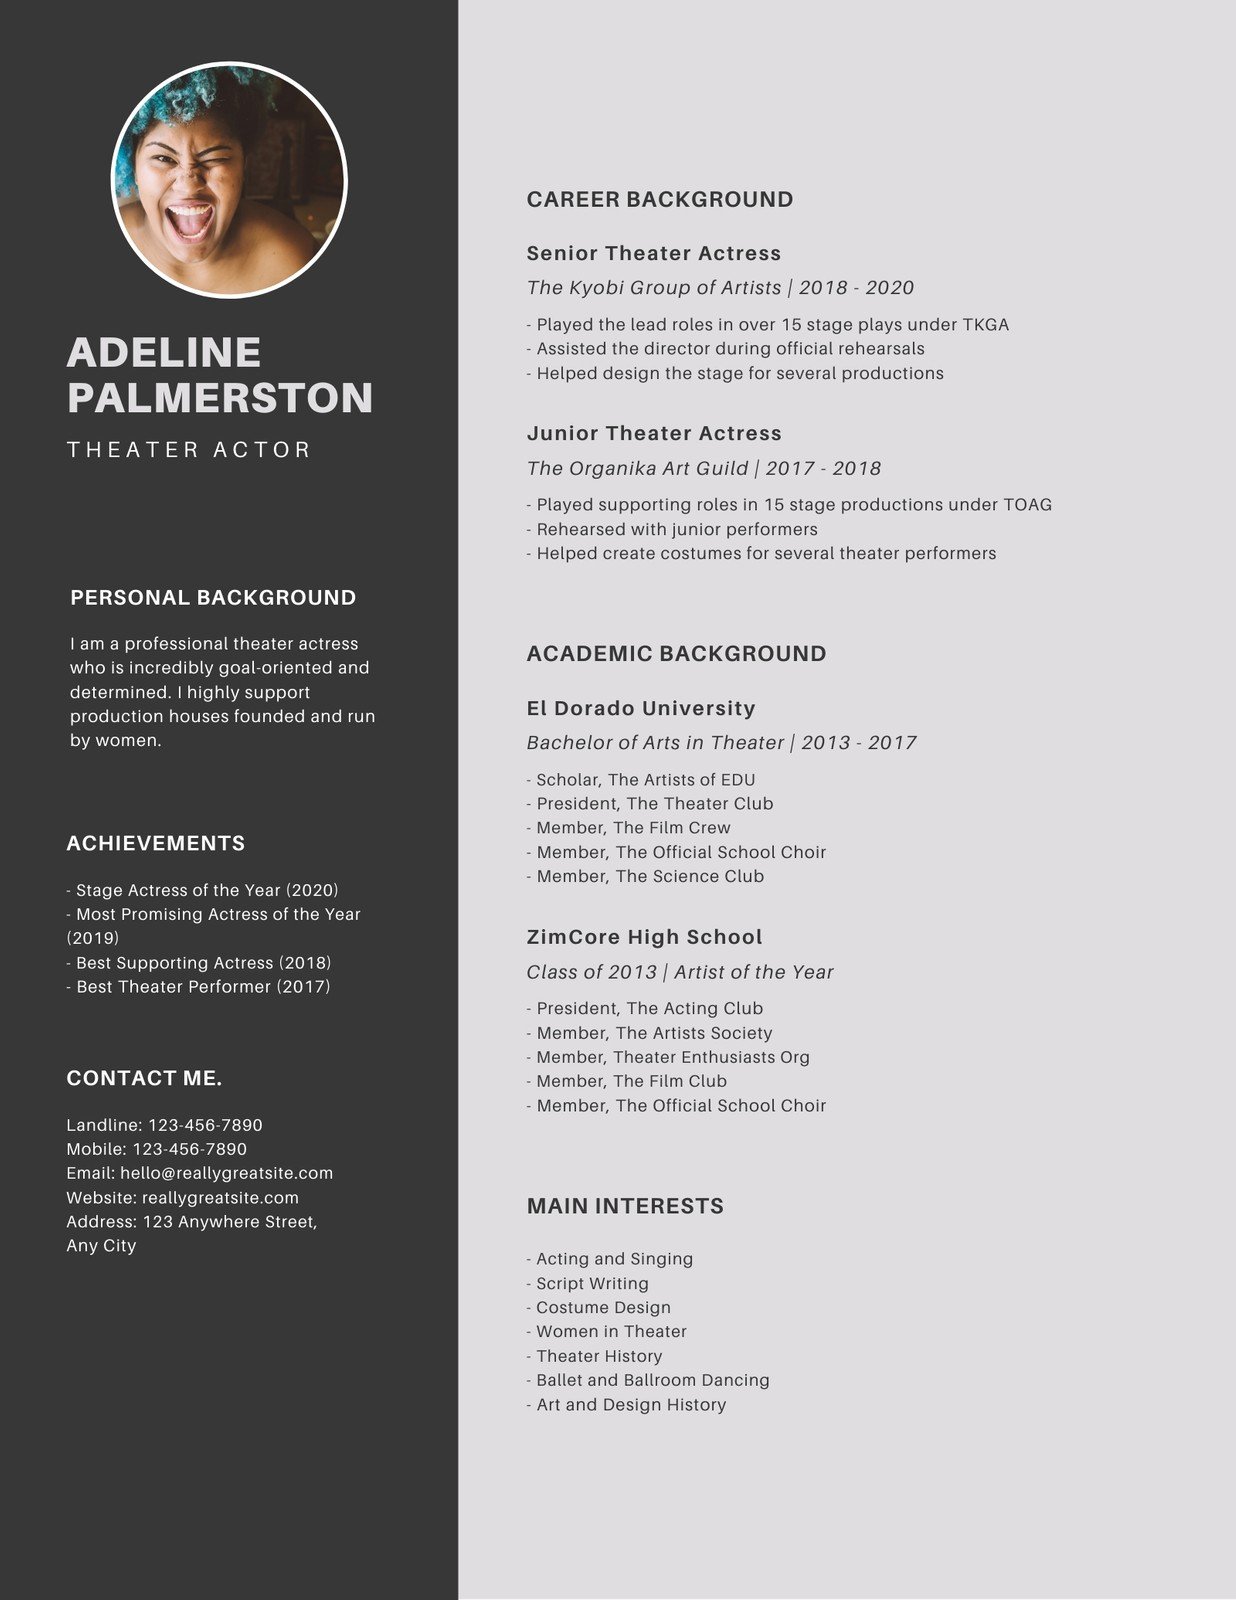 Customize 24+ Acting Resumes Templates Online - Canva For Theatrical Resume Template Word